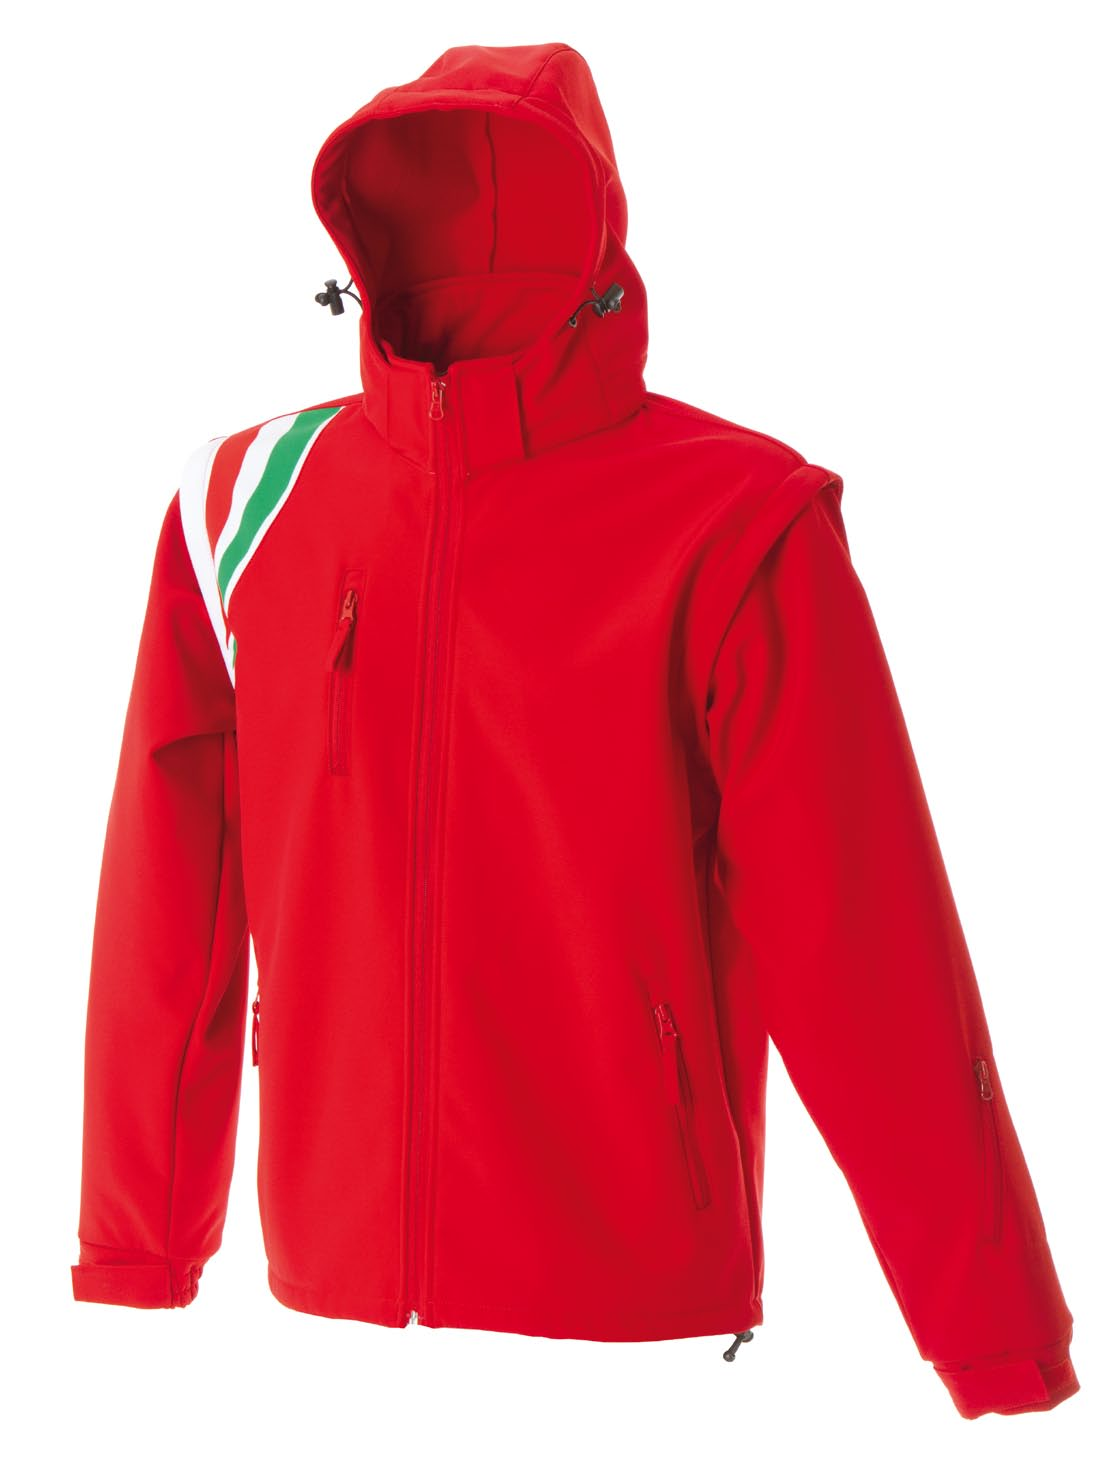 Jacket in soft shell with detachable sleeves 92% polyester - 8% elastan Giubbino in soft shell 92% polyestere - 8% elastan con Maniche staccabili Veste en soft shell 92% polyester - 8%